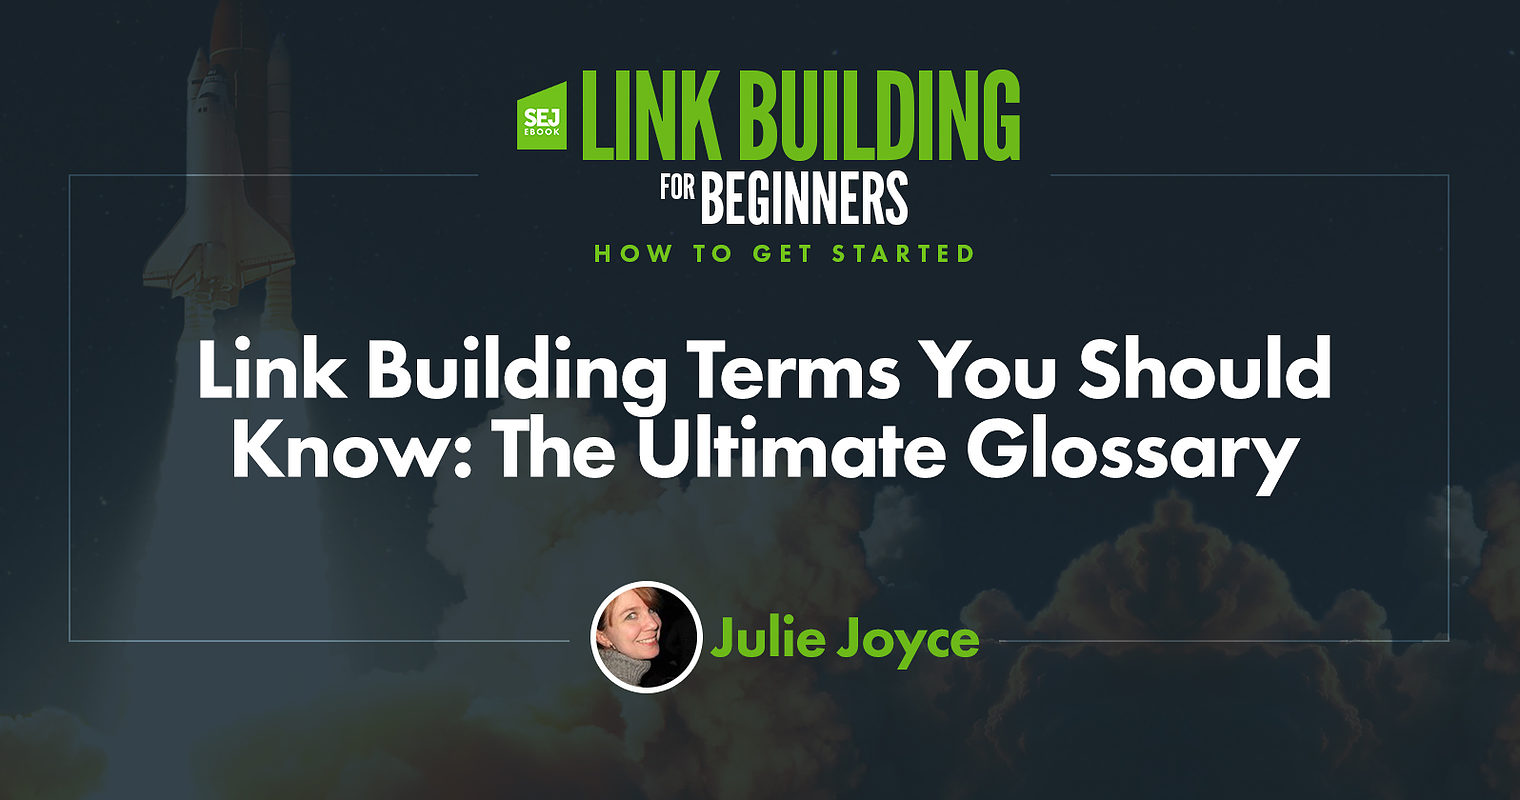 Link Building Terms You Should Know: The Ultimate Glossary